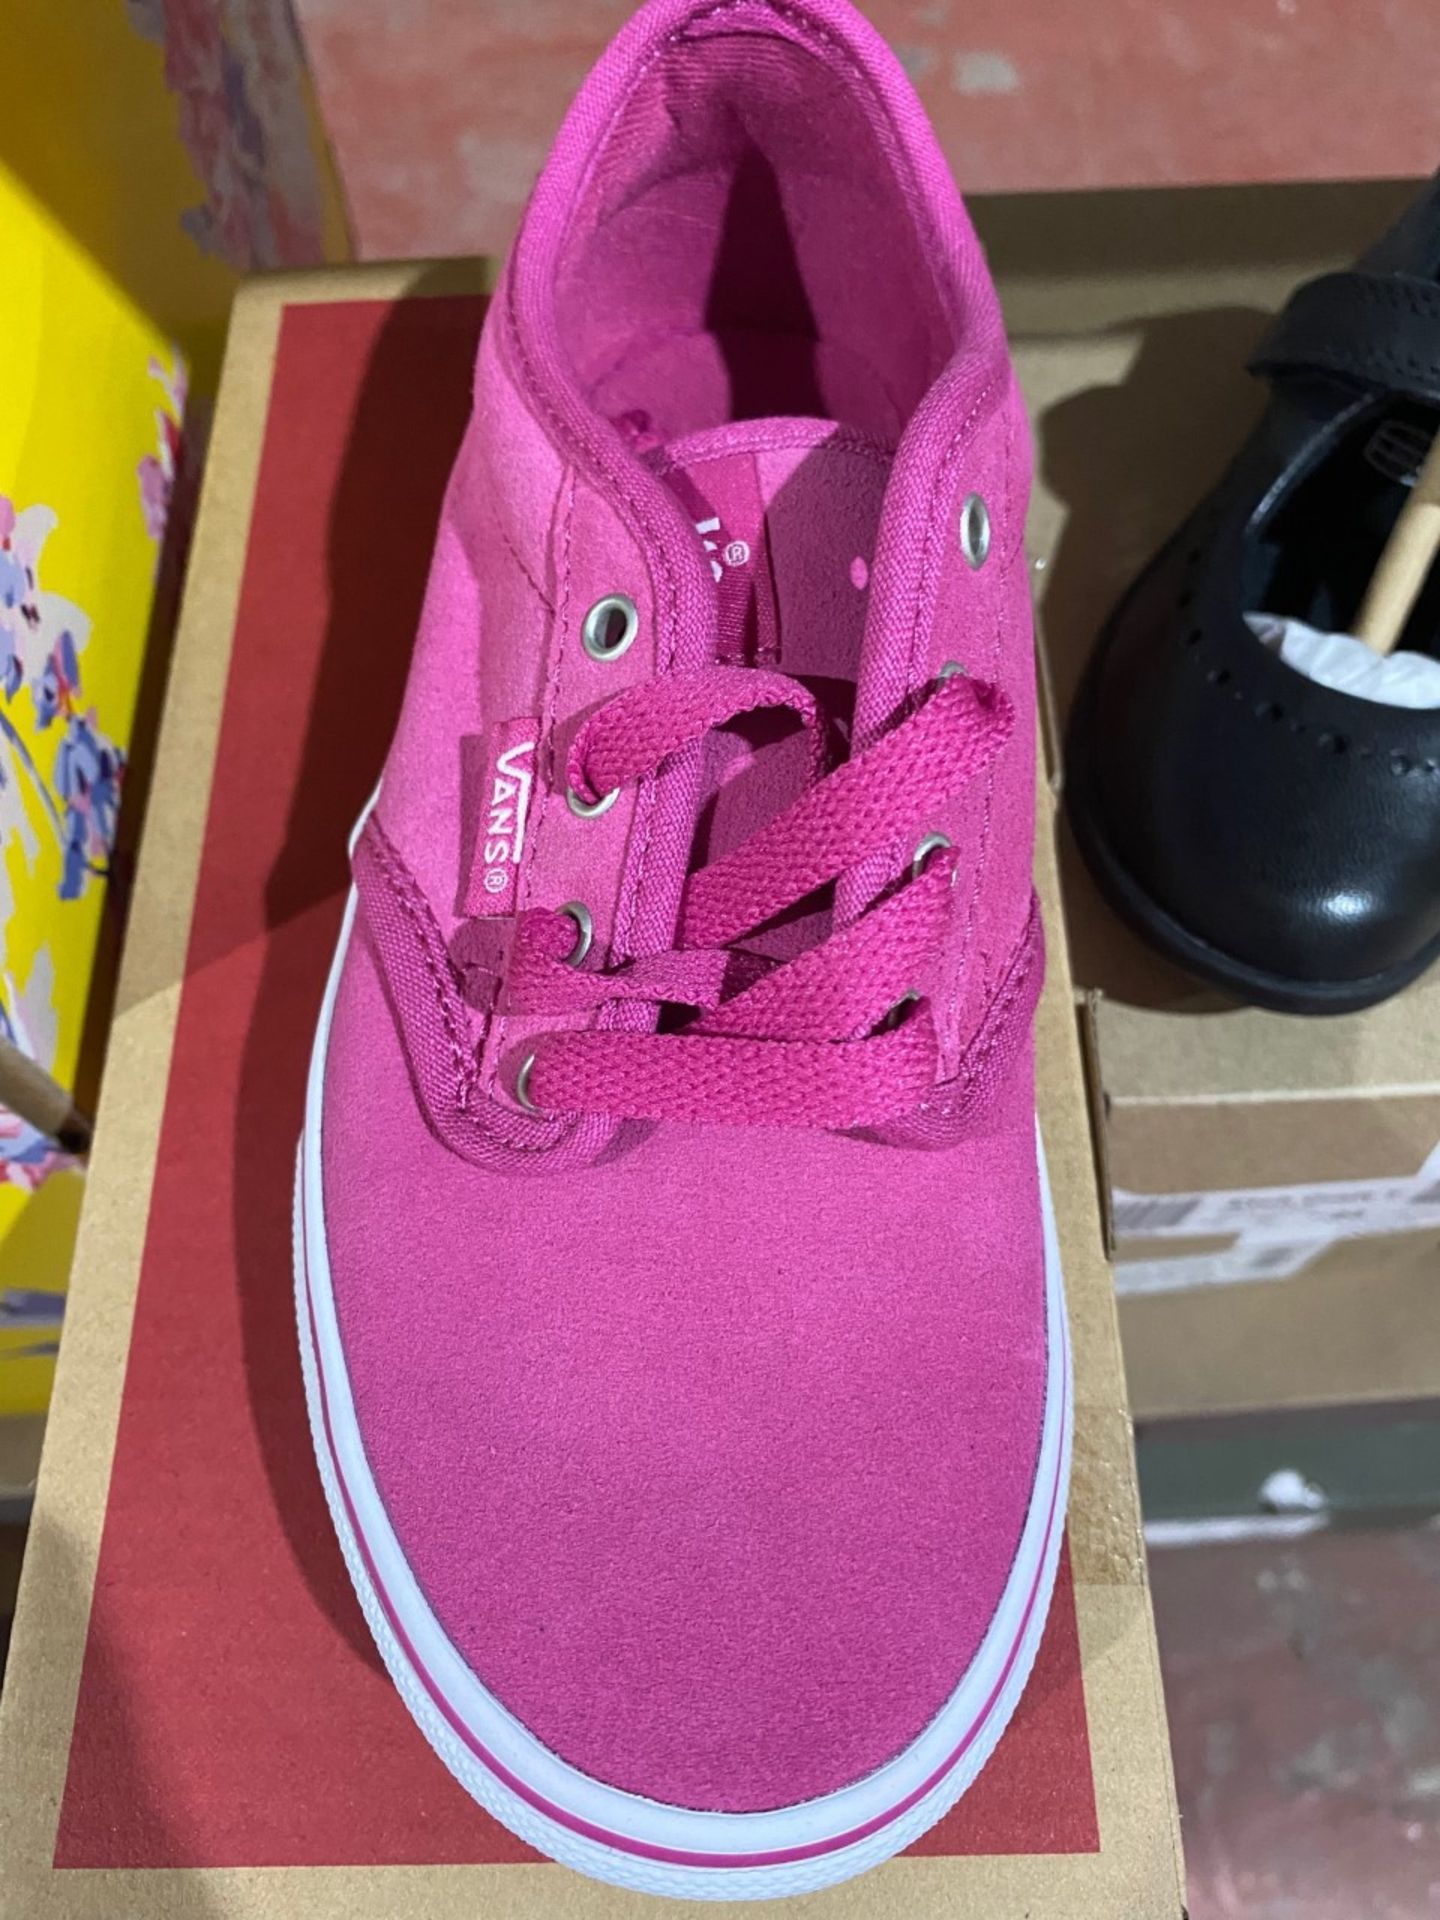 NEW & BOXED VANS BERRY INFANT 12 (49/14) - Image 2 of 2